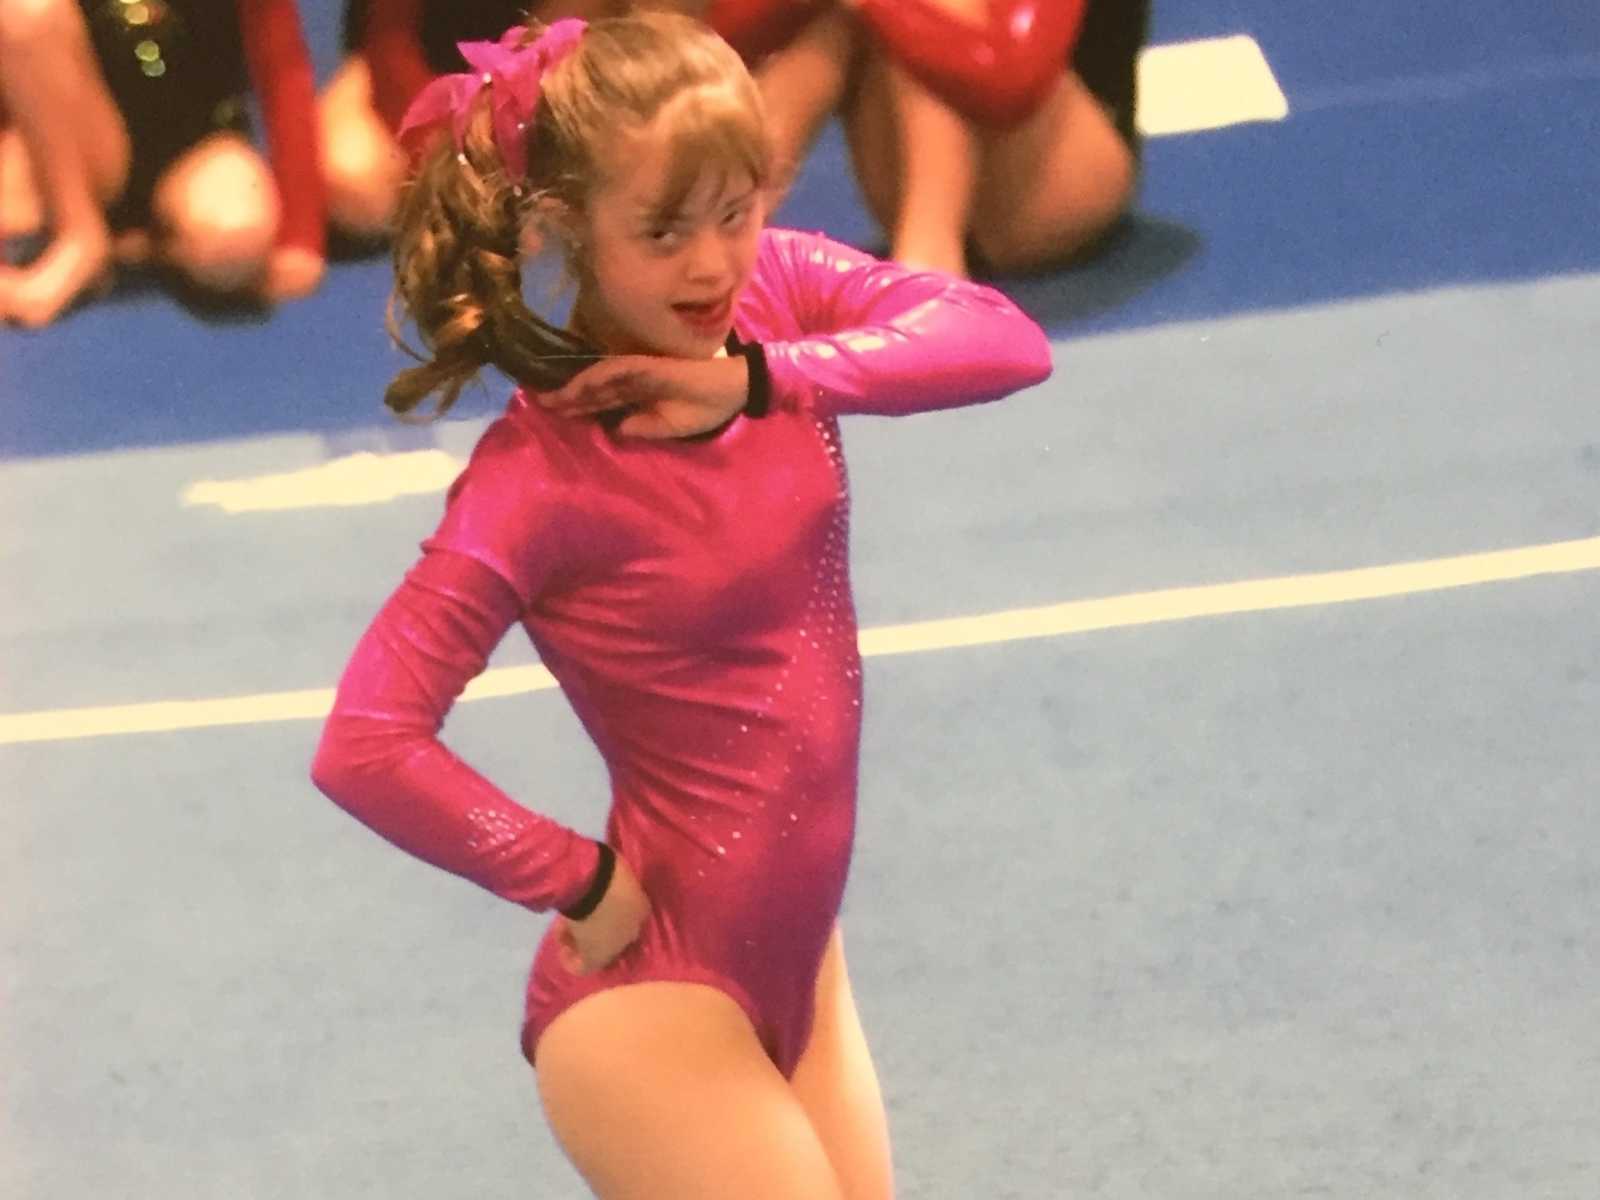 down syndrome girl with pink sparkly leotard and scrunchie does a floor routine